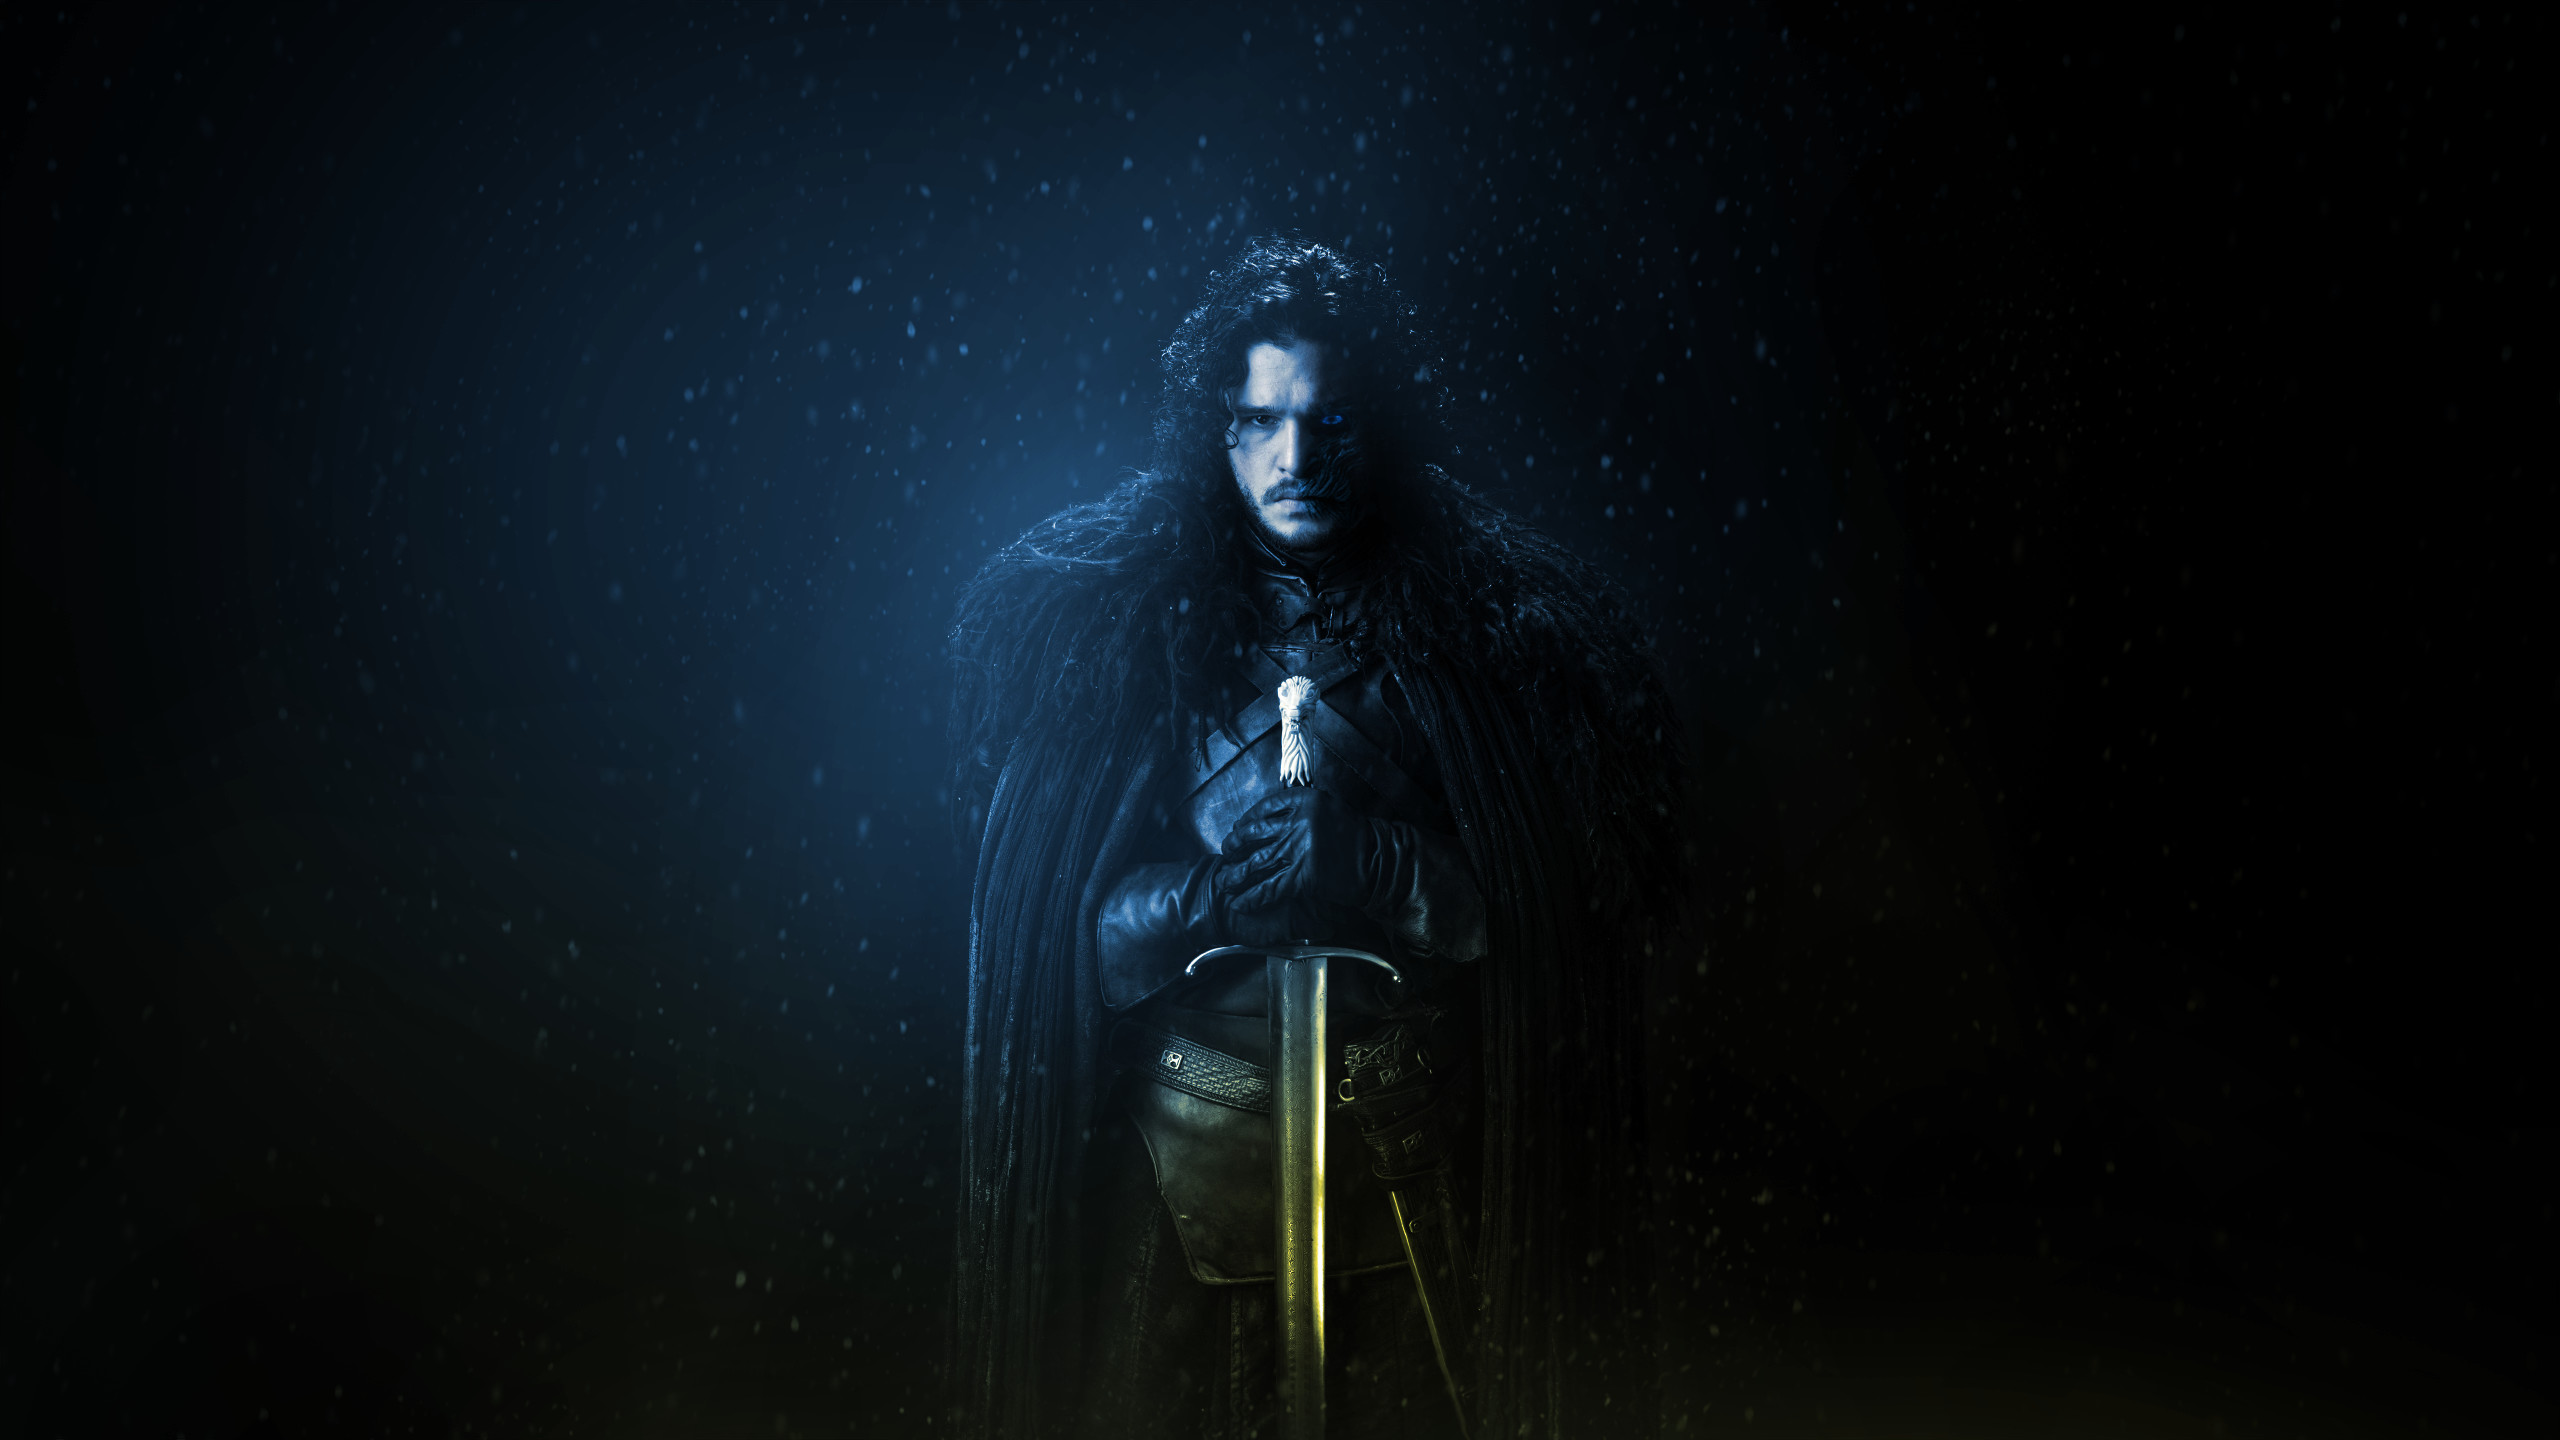 HD Wallpaper Background ID838517. TV Show Game Of Thrones